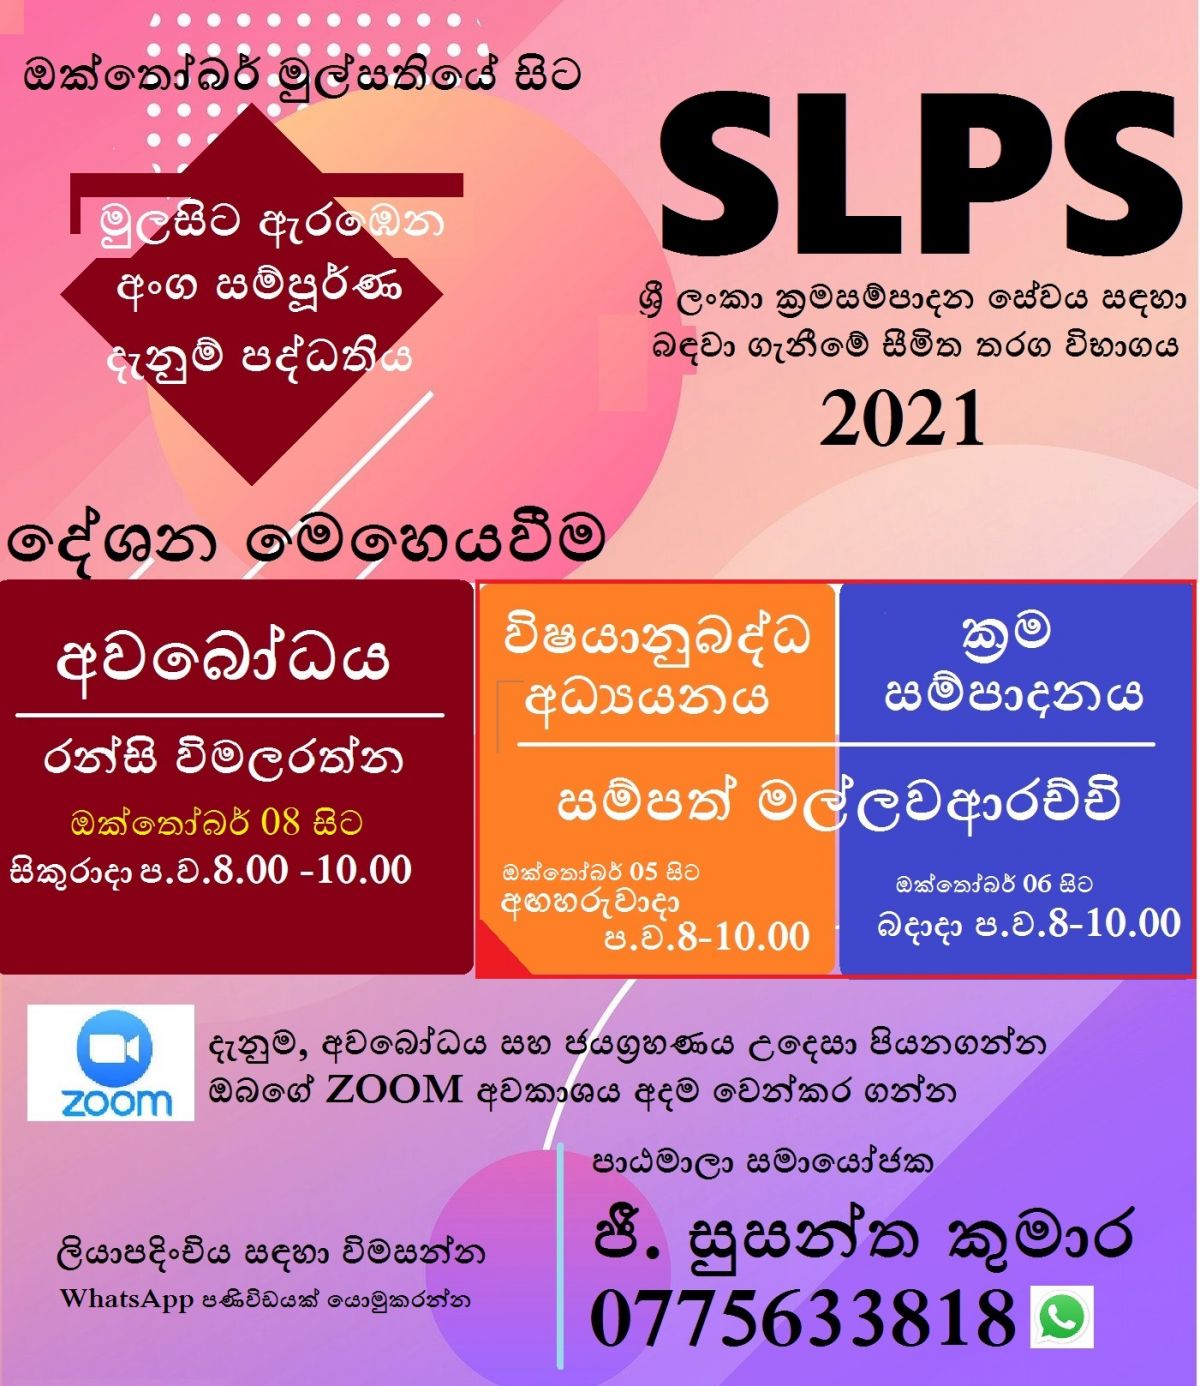 SLPS Limited Planning